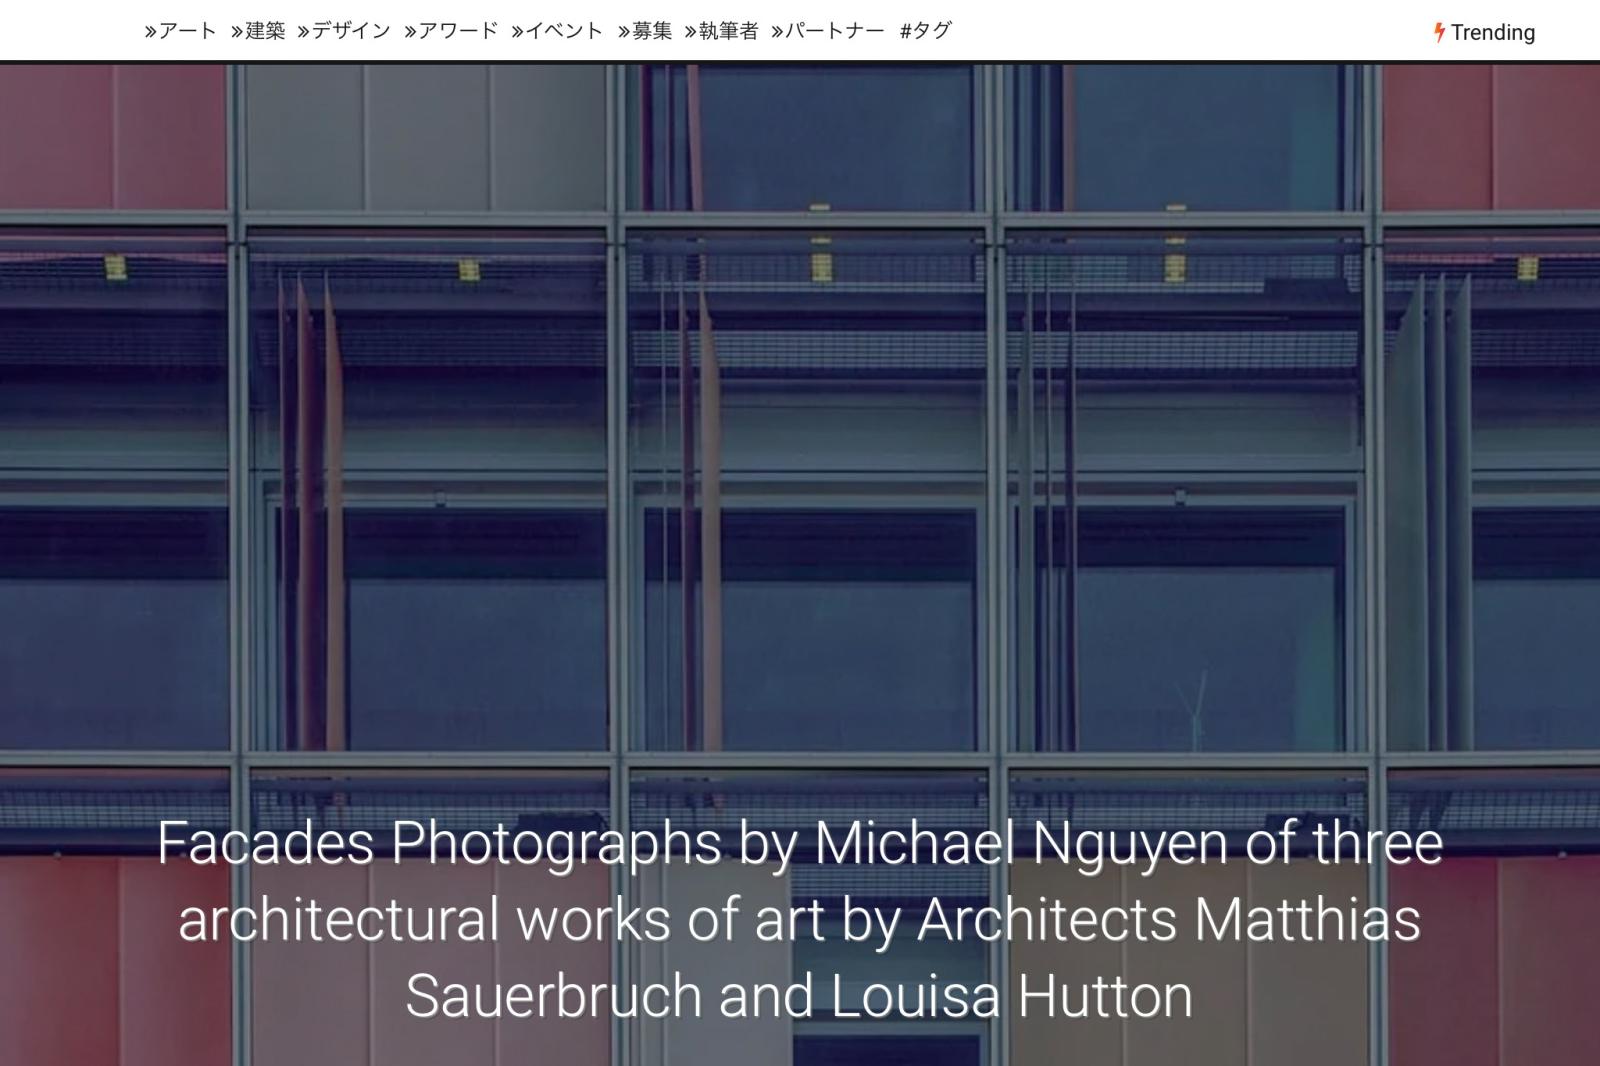 NPO Aoyama Design Forum featured Facades Photographs by Michael Nguyen of three architectural works of art by Architects Matthias Sauerbruch and Louisa Hutton im ADF Magazin Tokyo 